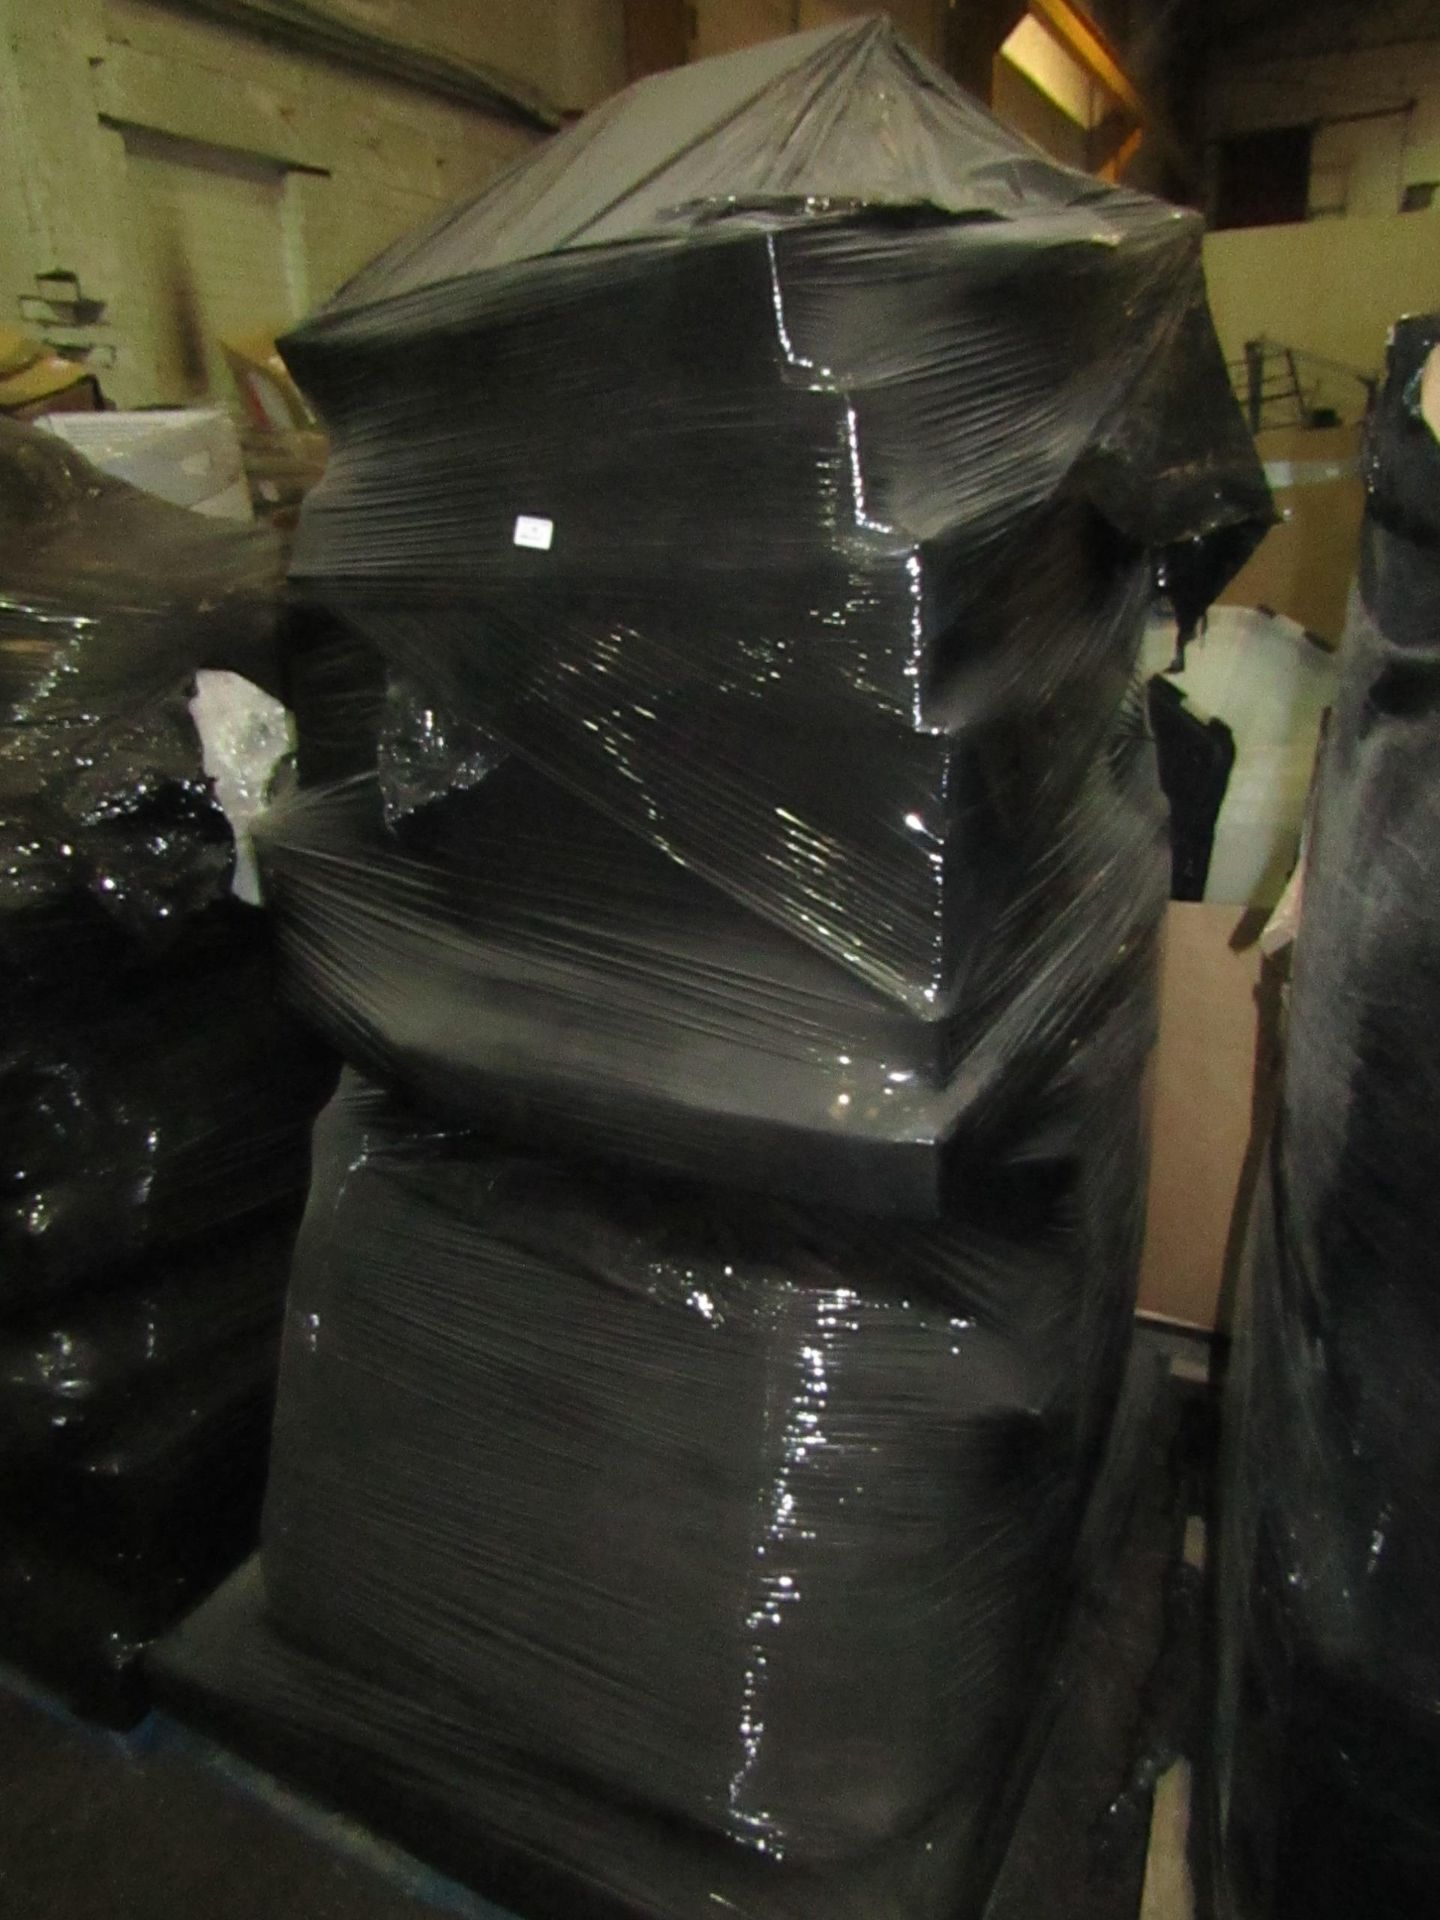 Unique Opportunity to Purchase a Mystery pallet of stock, this pallet is Black wrapped and is part